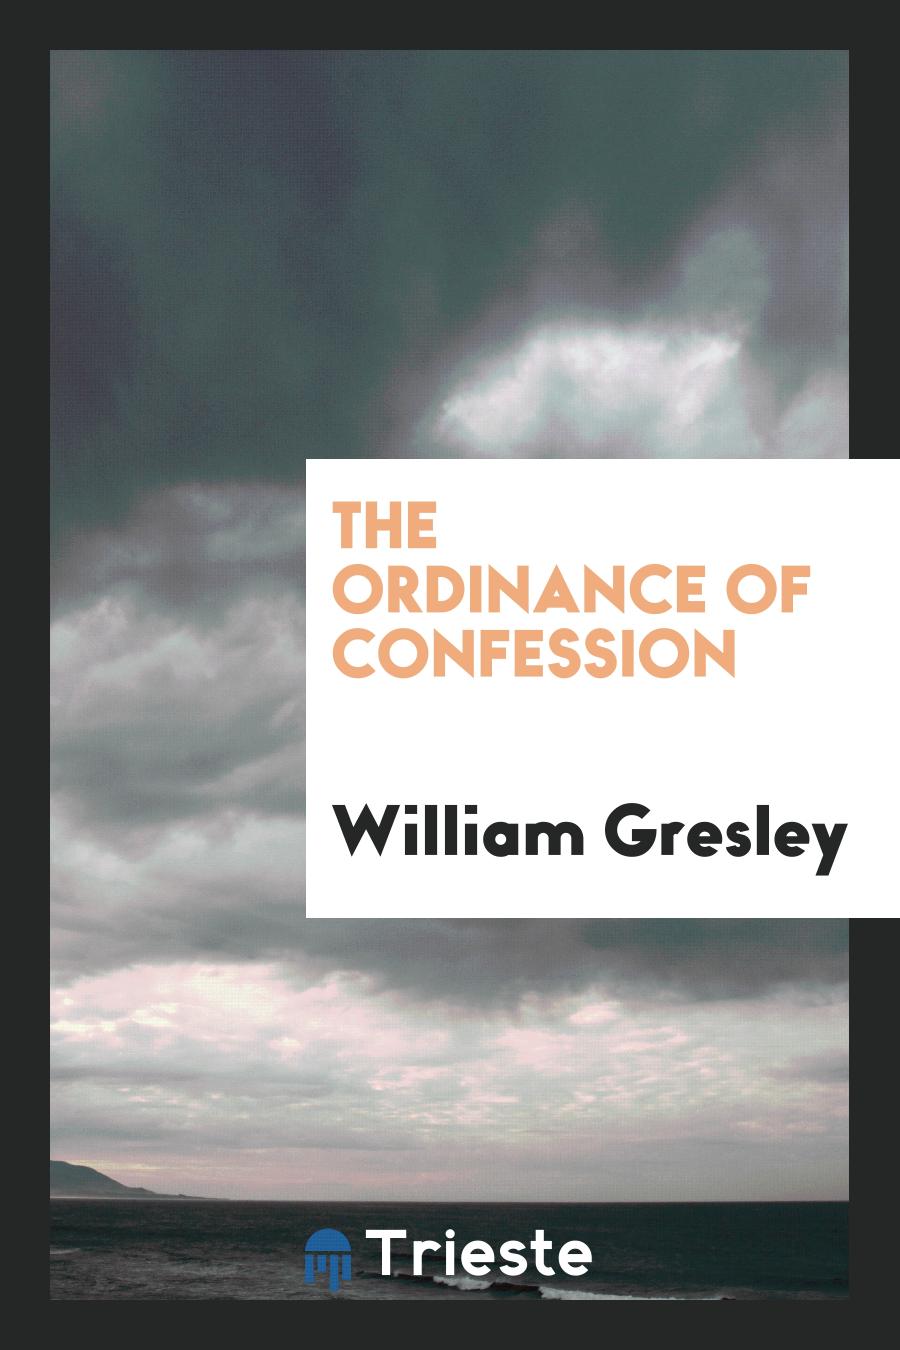 The Ordinance of Confession